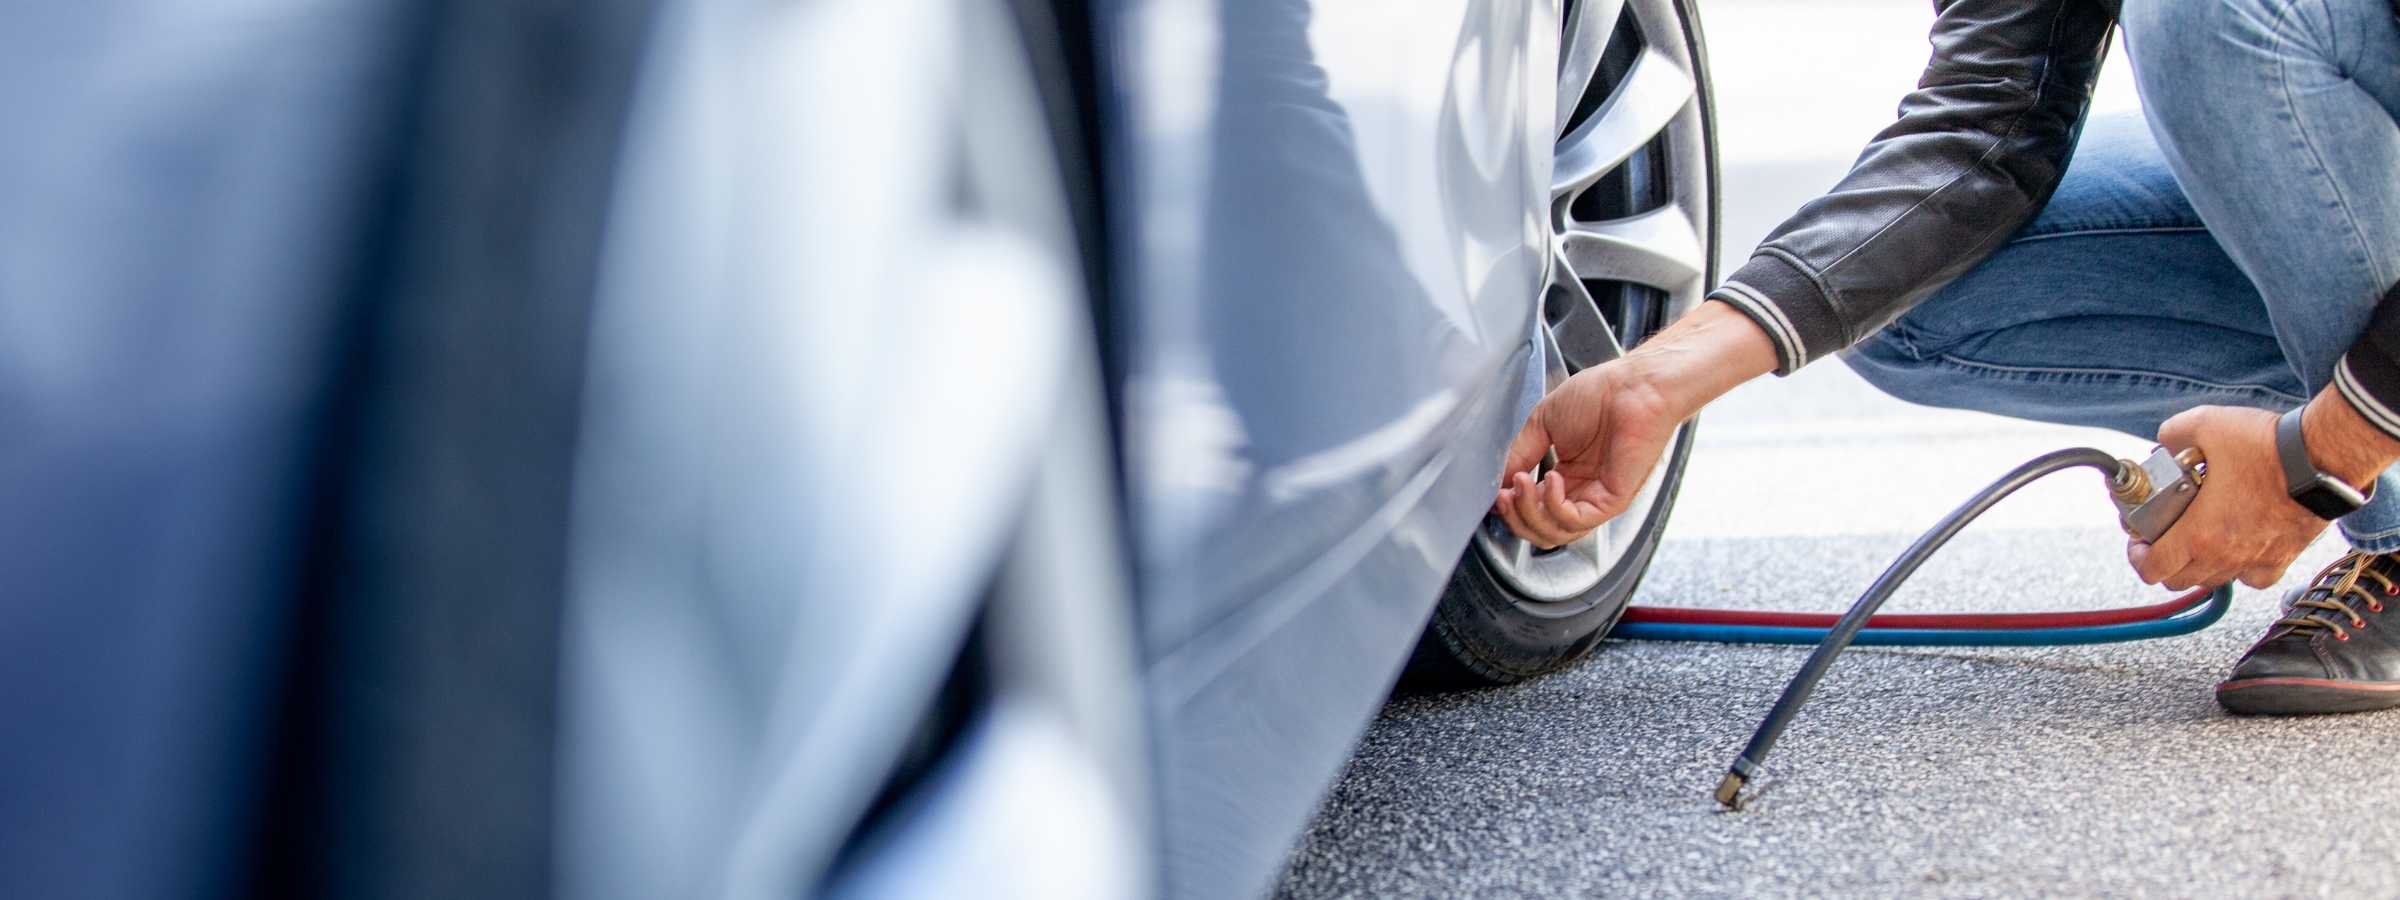 The Top 5 Myths About Tires - Keeping It “Wheel” - Rockingham Insurance